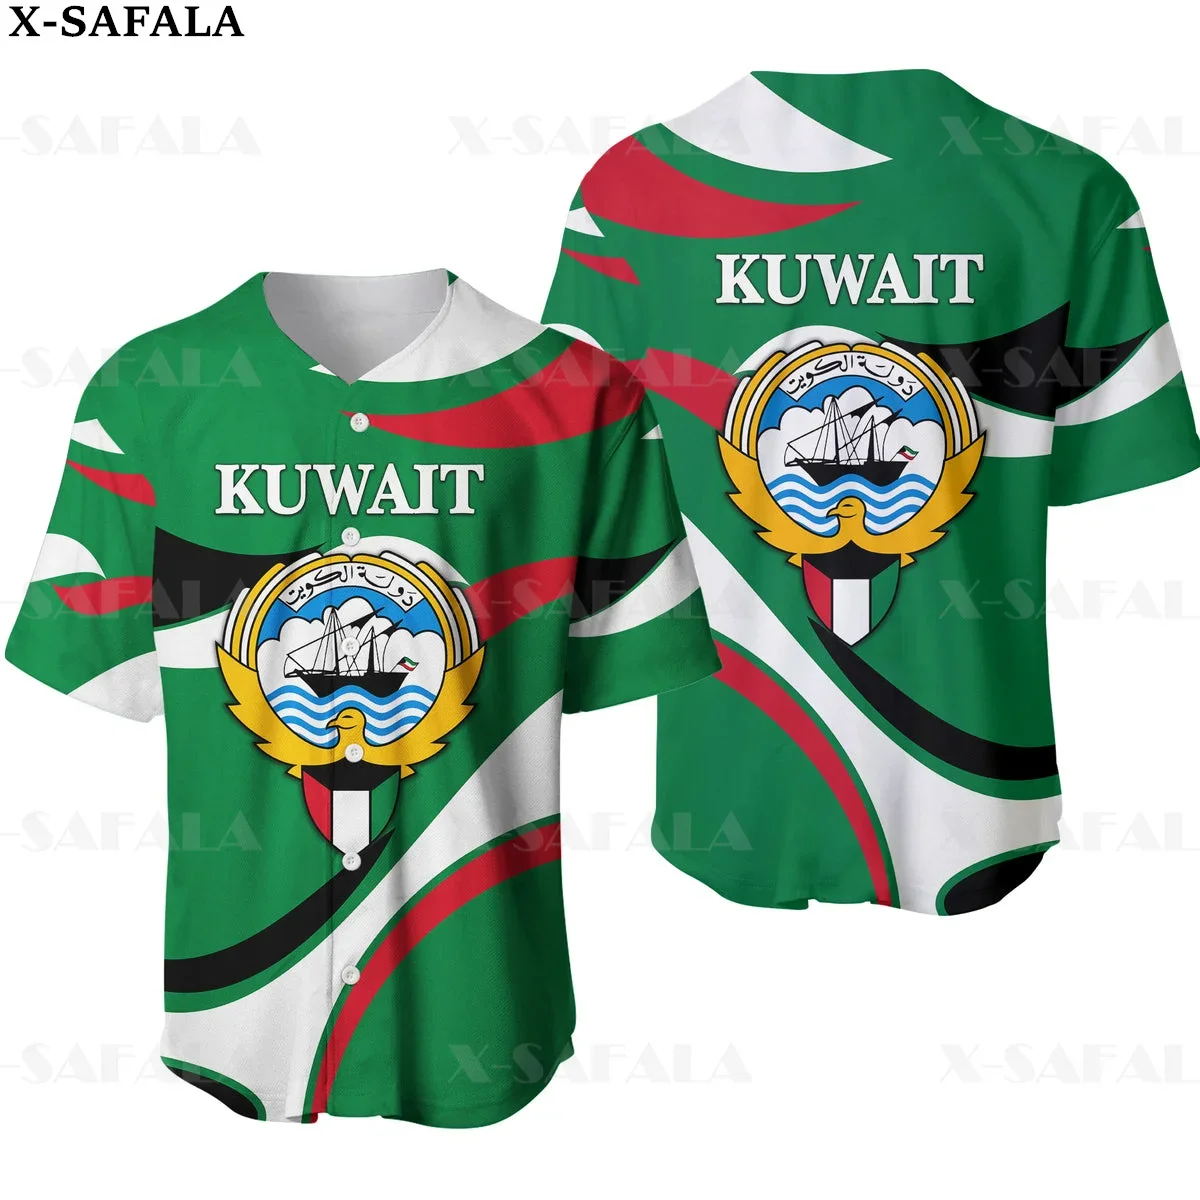 

Kuwait COAT OF ARMS Love Country Flag 3D Printed Baseball Jersey Shirt Men's Tops Tee Oversized Streetwear-6